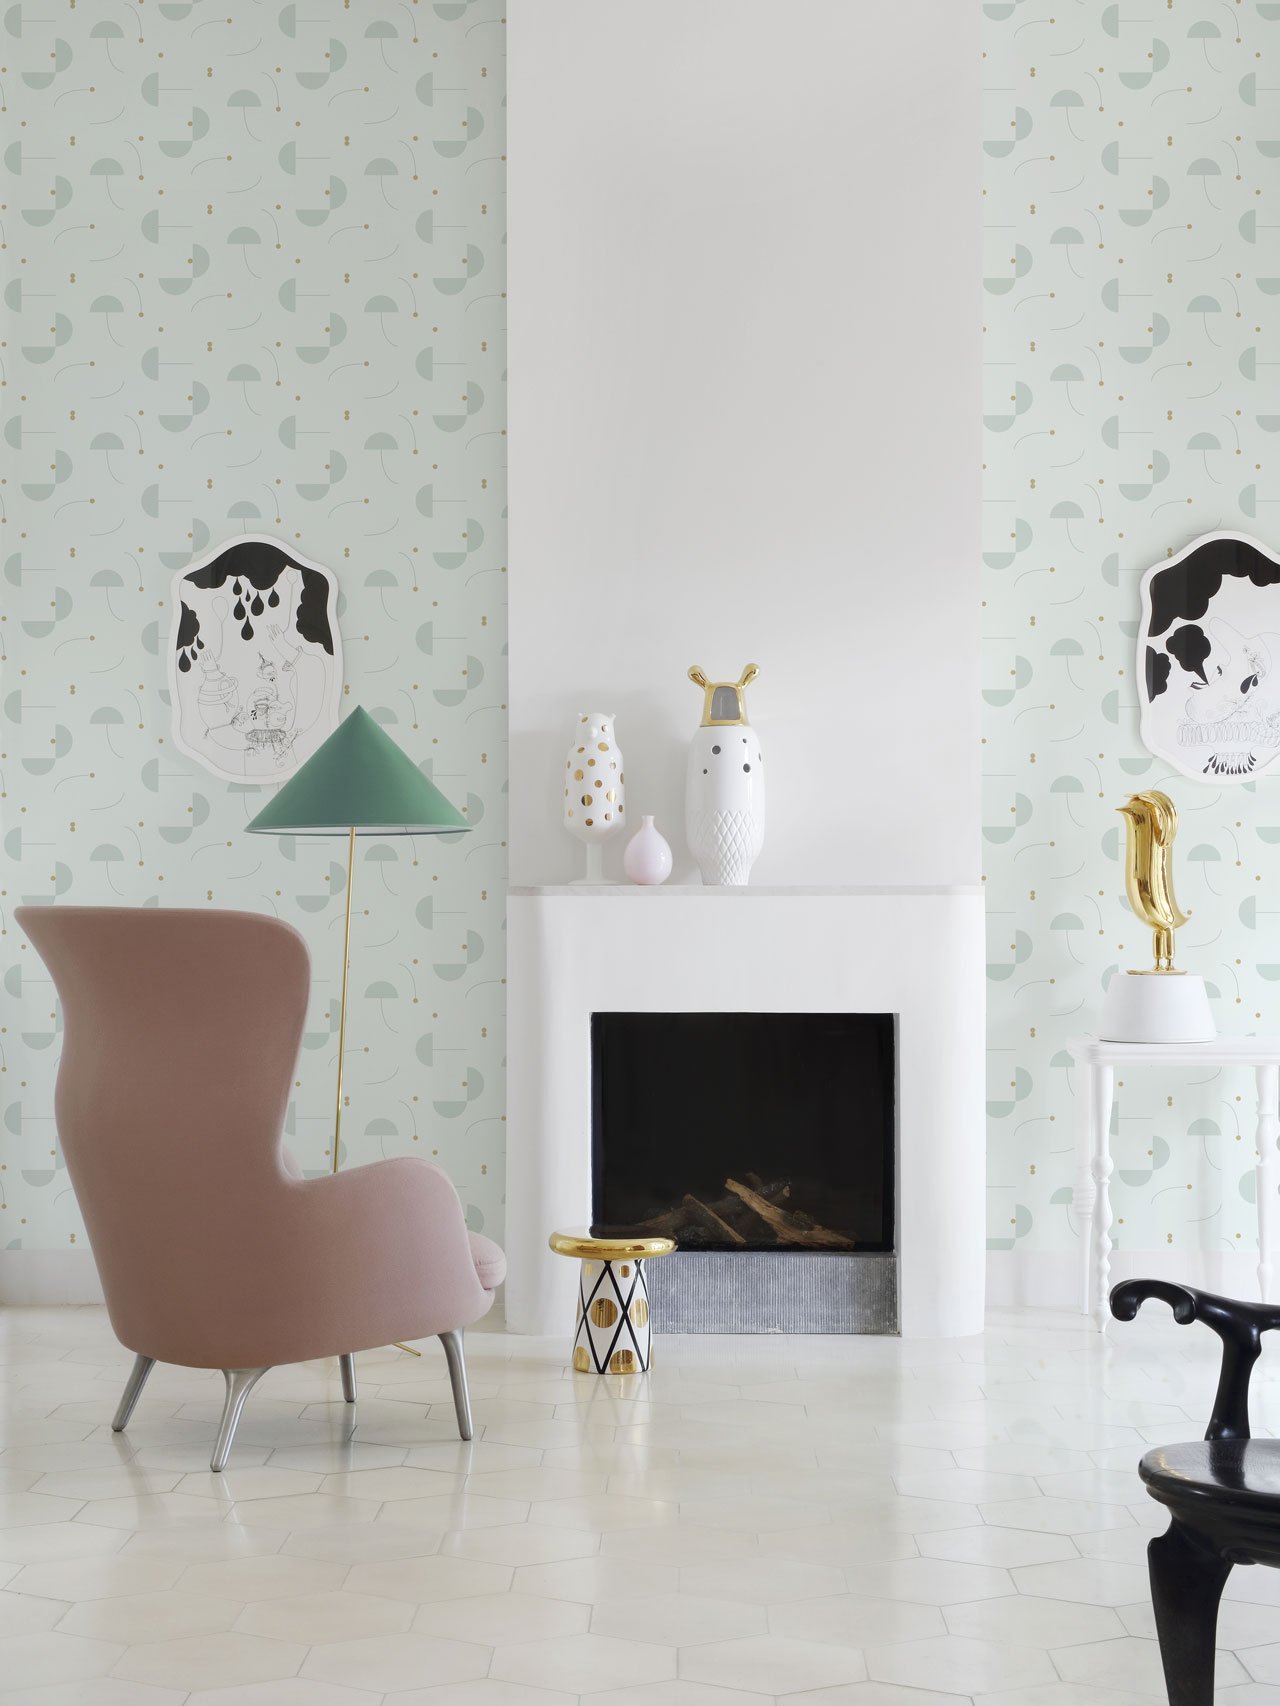 The latest collection from Eco Wallpaper features patterns created by the Spanish designer Jaime Hayon.